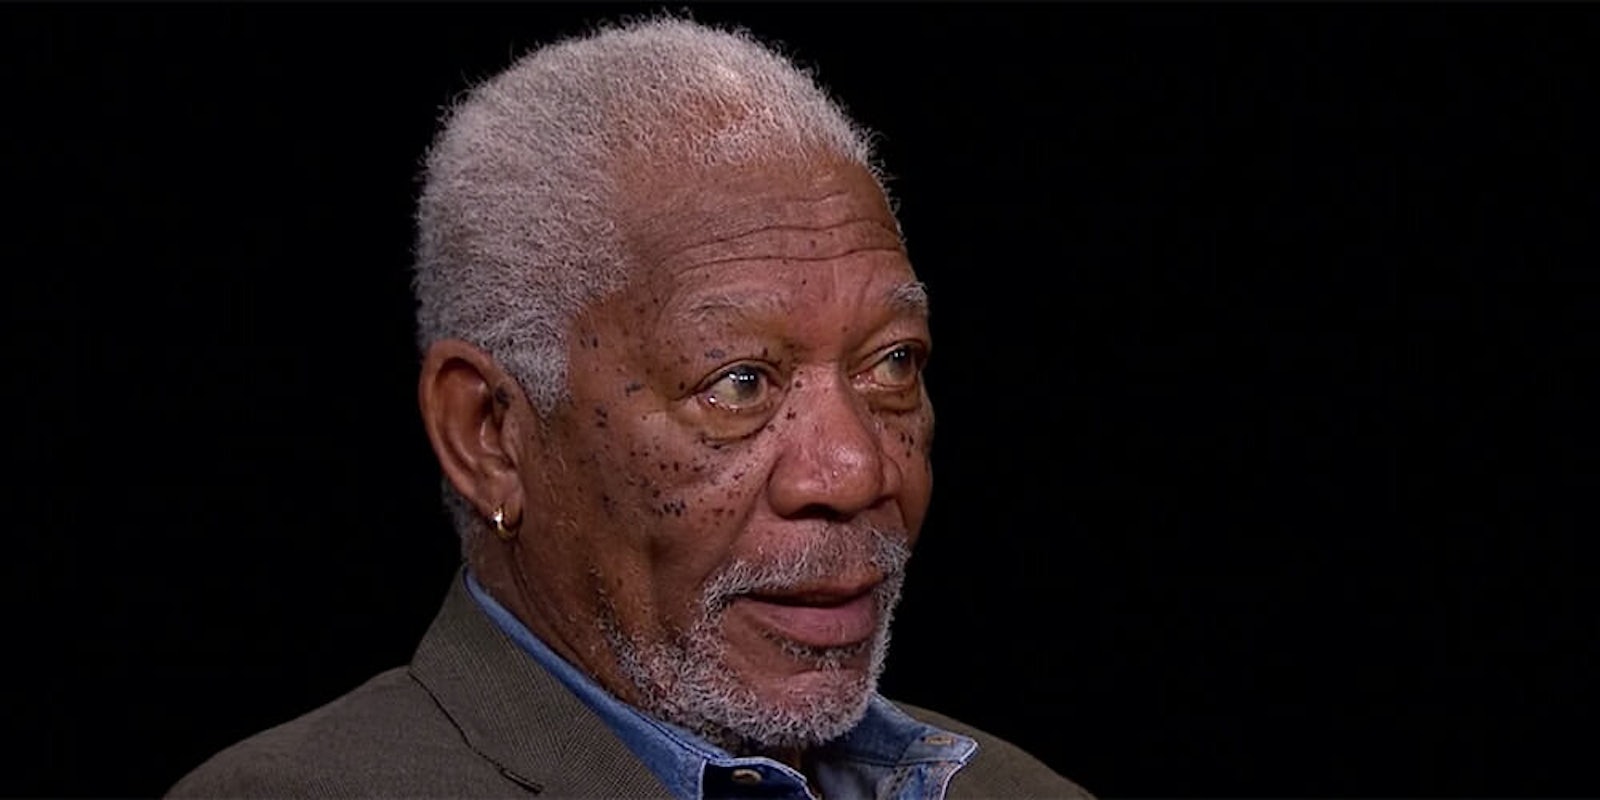 Morgan Freeman has been accused by multiple people of sexual harassment and misconduct, according to a CNN report.